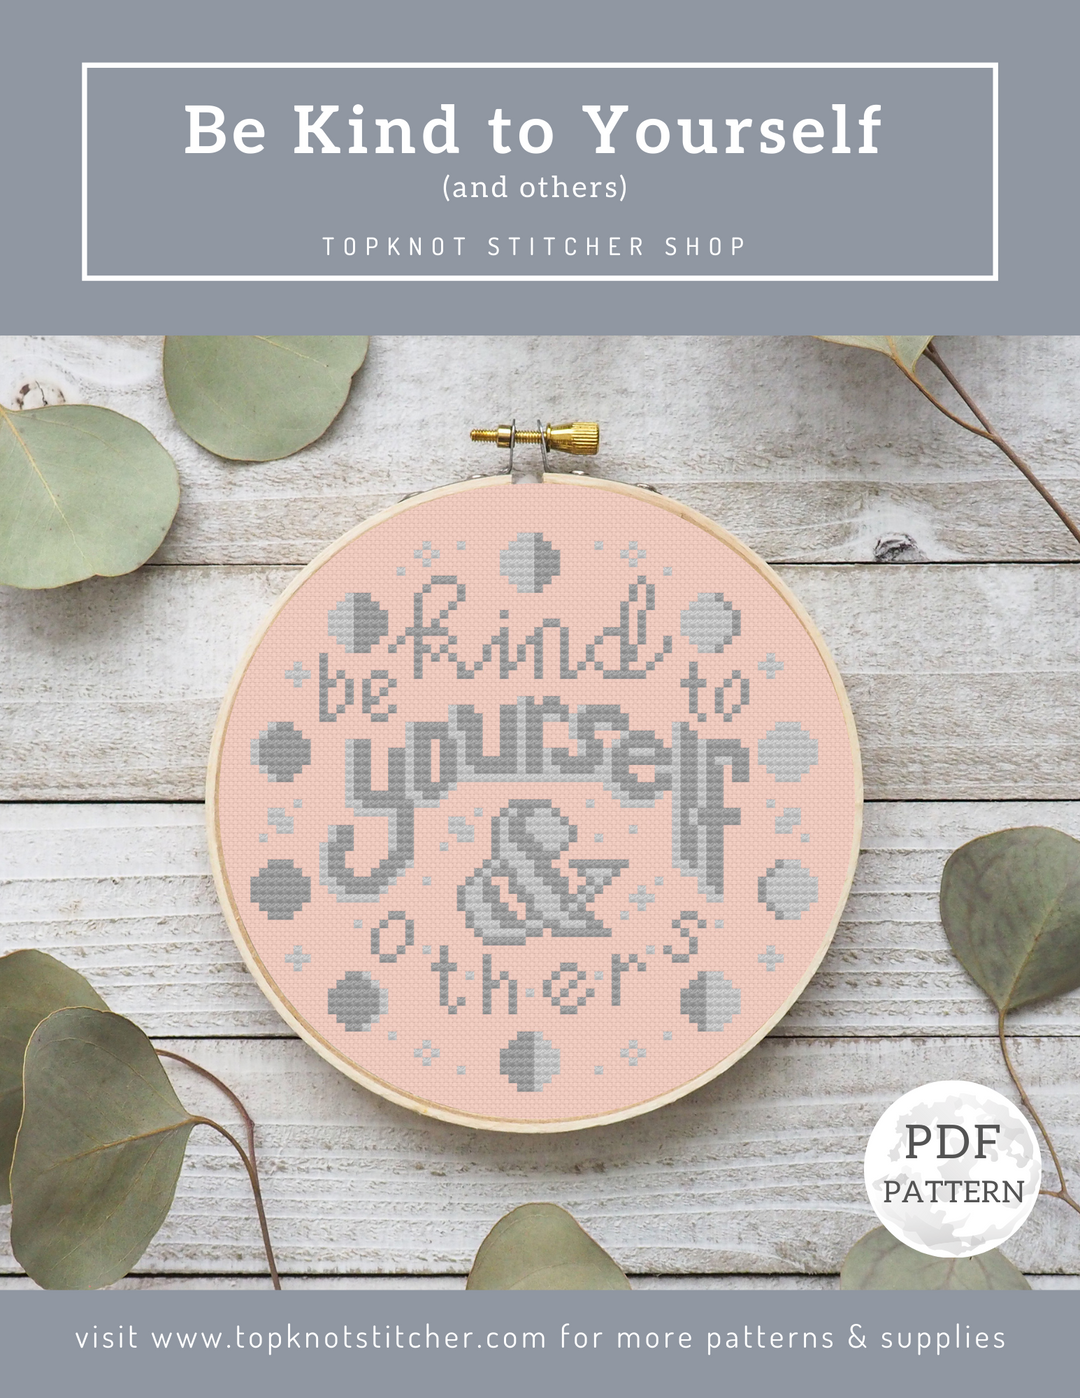 Be Kind to Yourself (and others) (PDF) | TopKnot Stitcher Shop - PDF Download